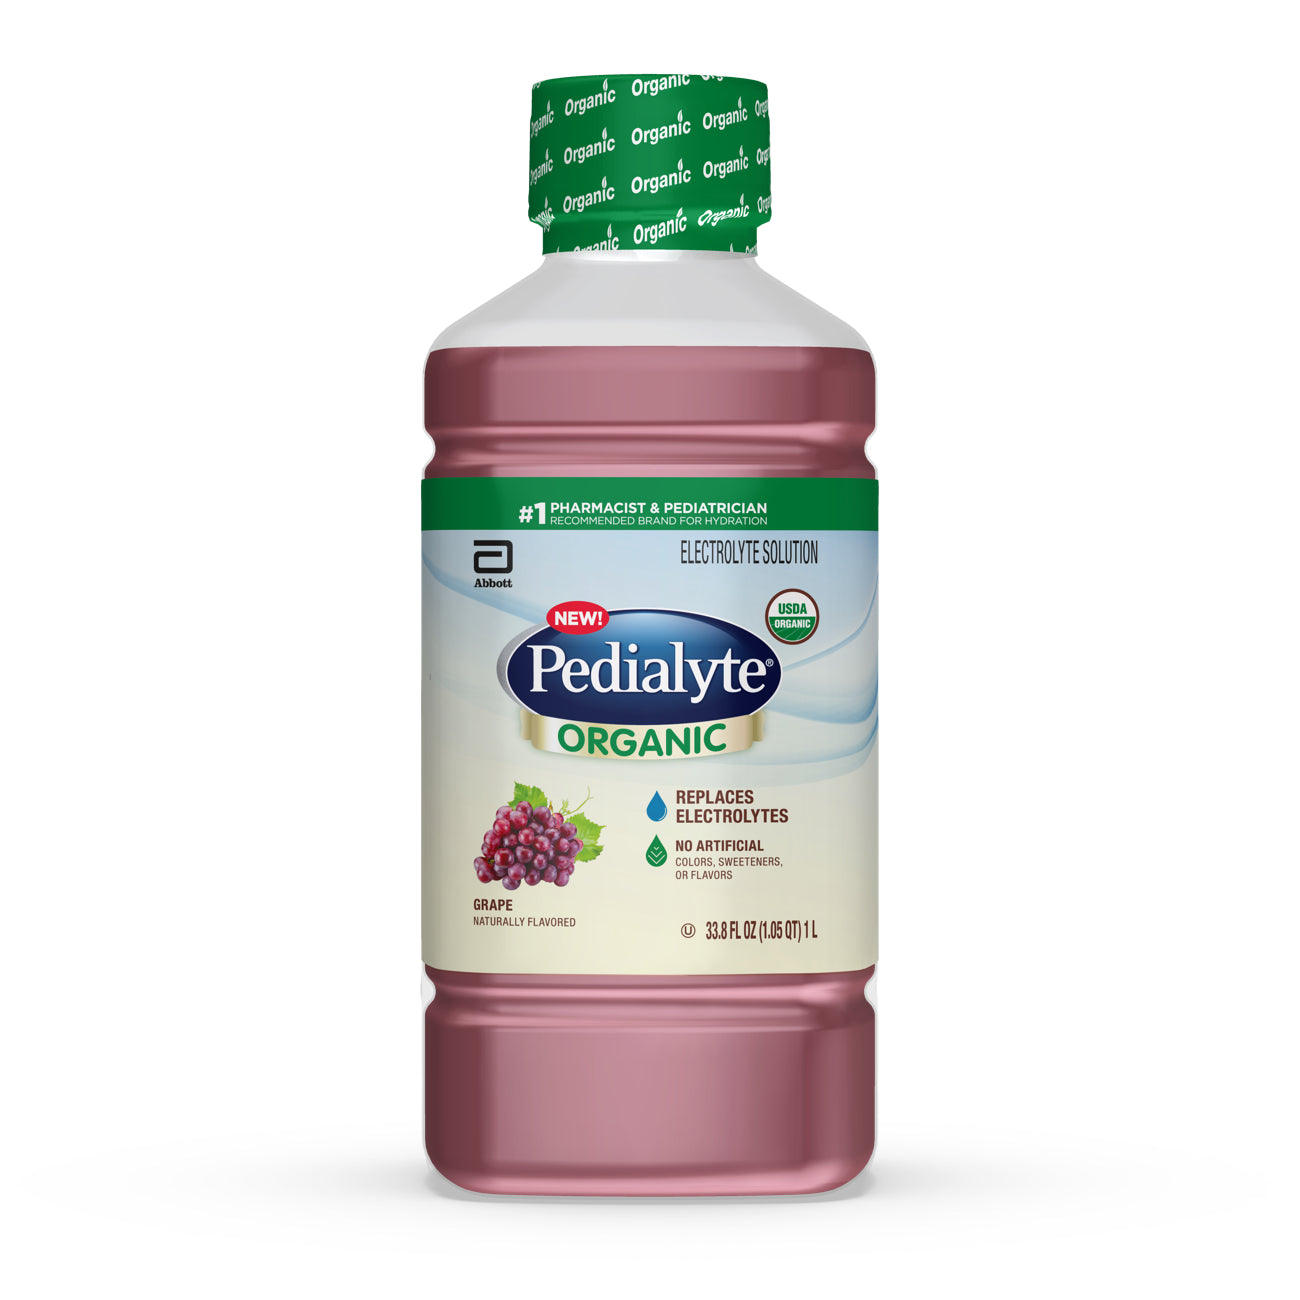 Pedialyte Organic Electrolyte Drink, Advanced Hydration for Kids & Adults, With Zinc for Immune Support, Grape, 1 Liter, 1 Count